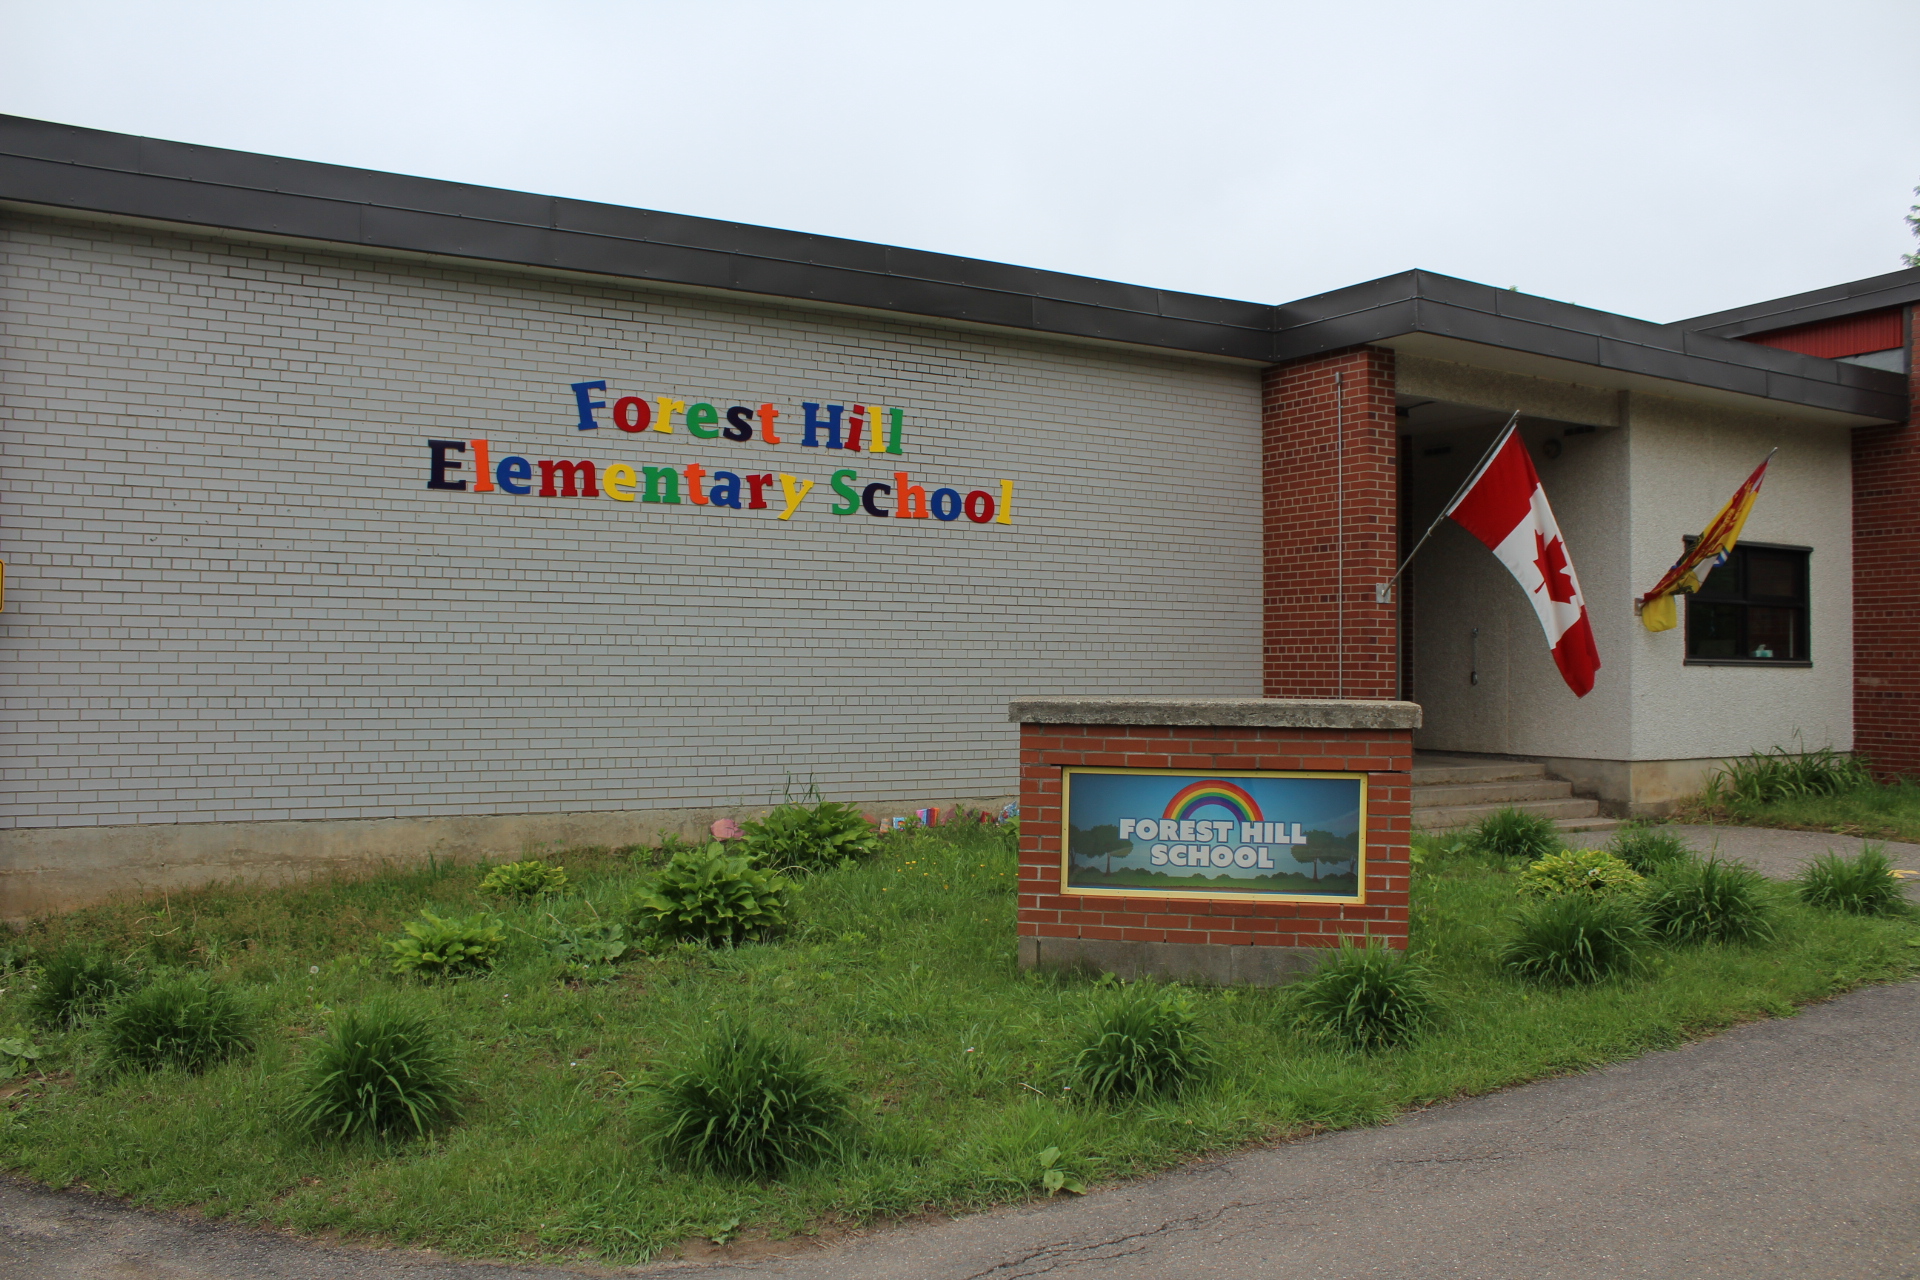 Forest Hill Elementary School. Fredericton, NB.